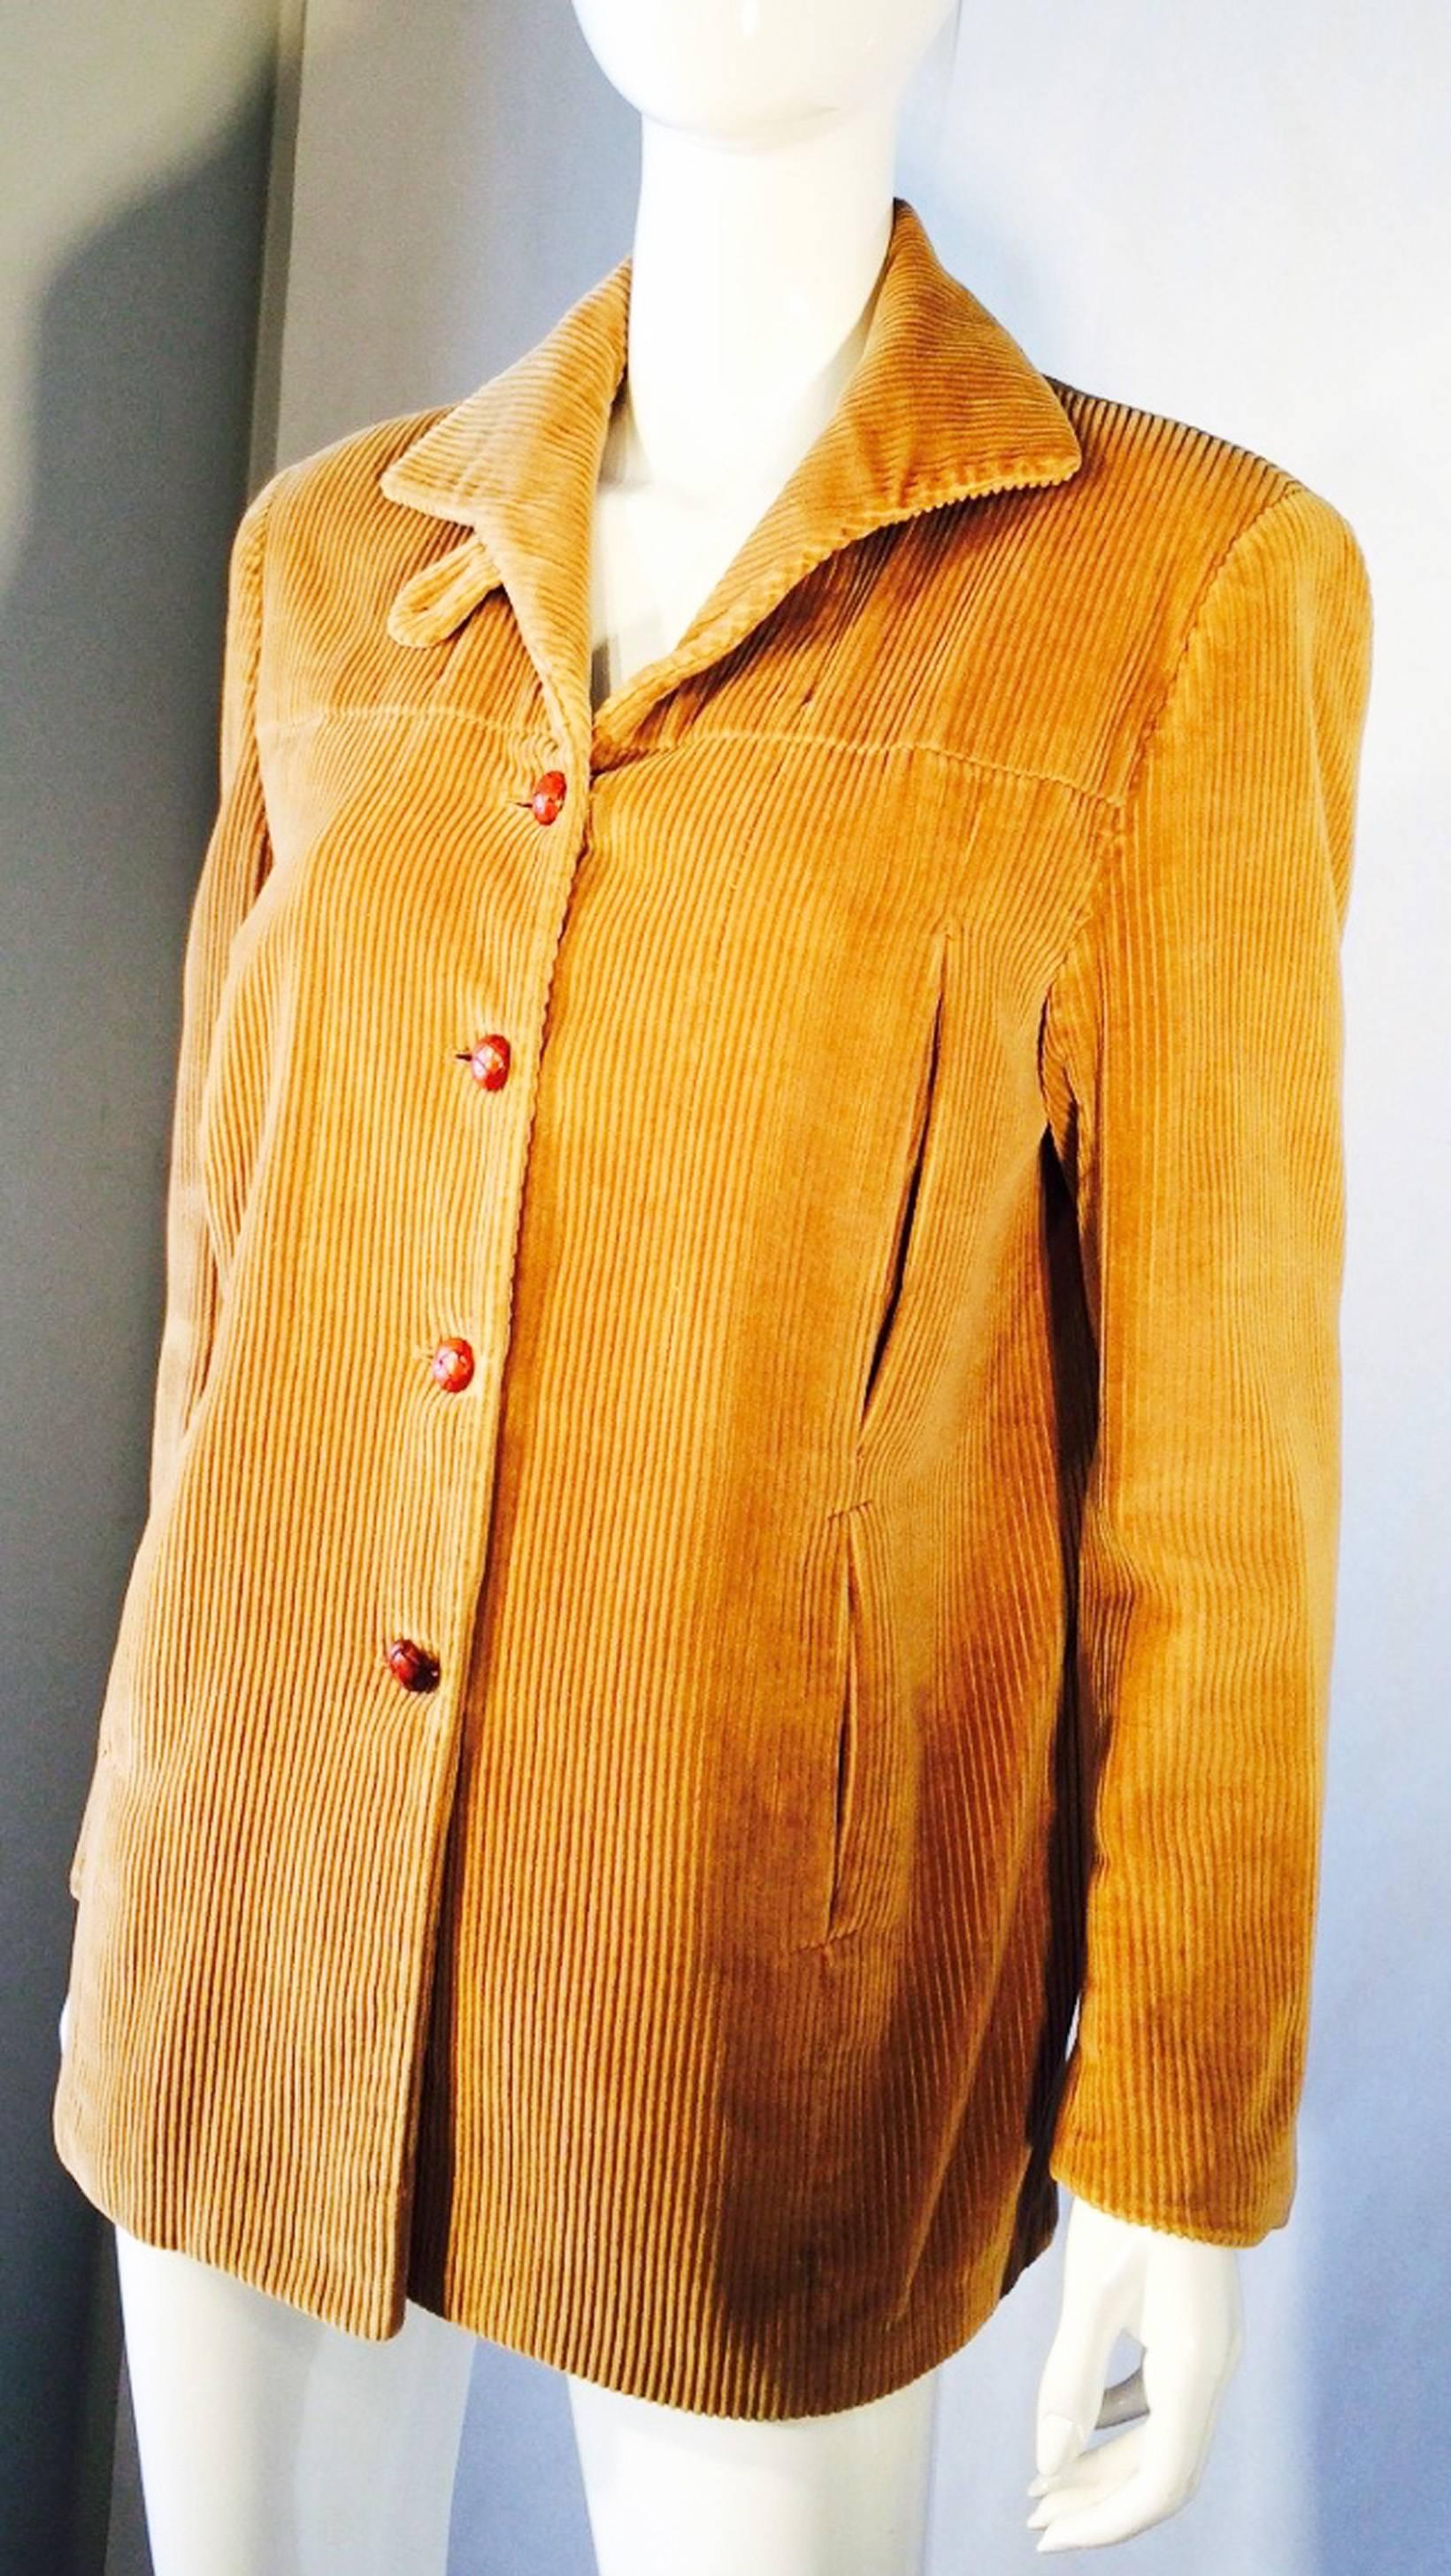 A fine and rare vintage Edith Head corduroy jacket. Authentic item inspired by the Edith Head costume designs from the Hollywood film, The Buccaneer (1958). Golden cotton corduroy fabric item features leather knot button closures and fully lined.